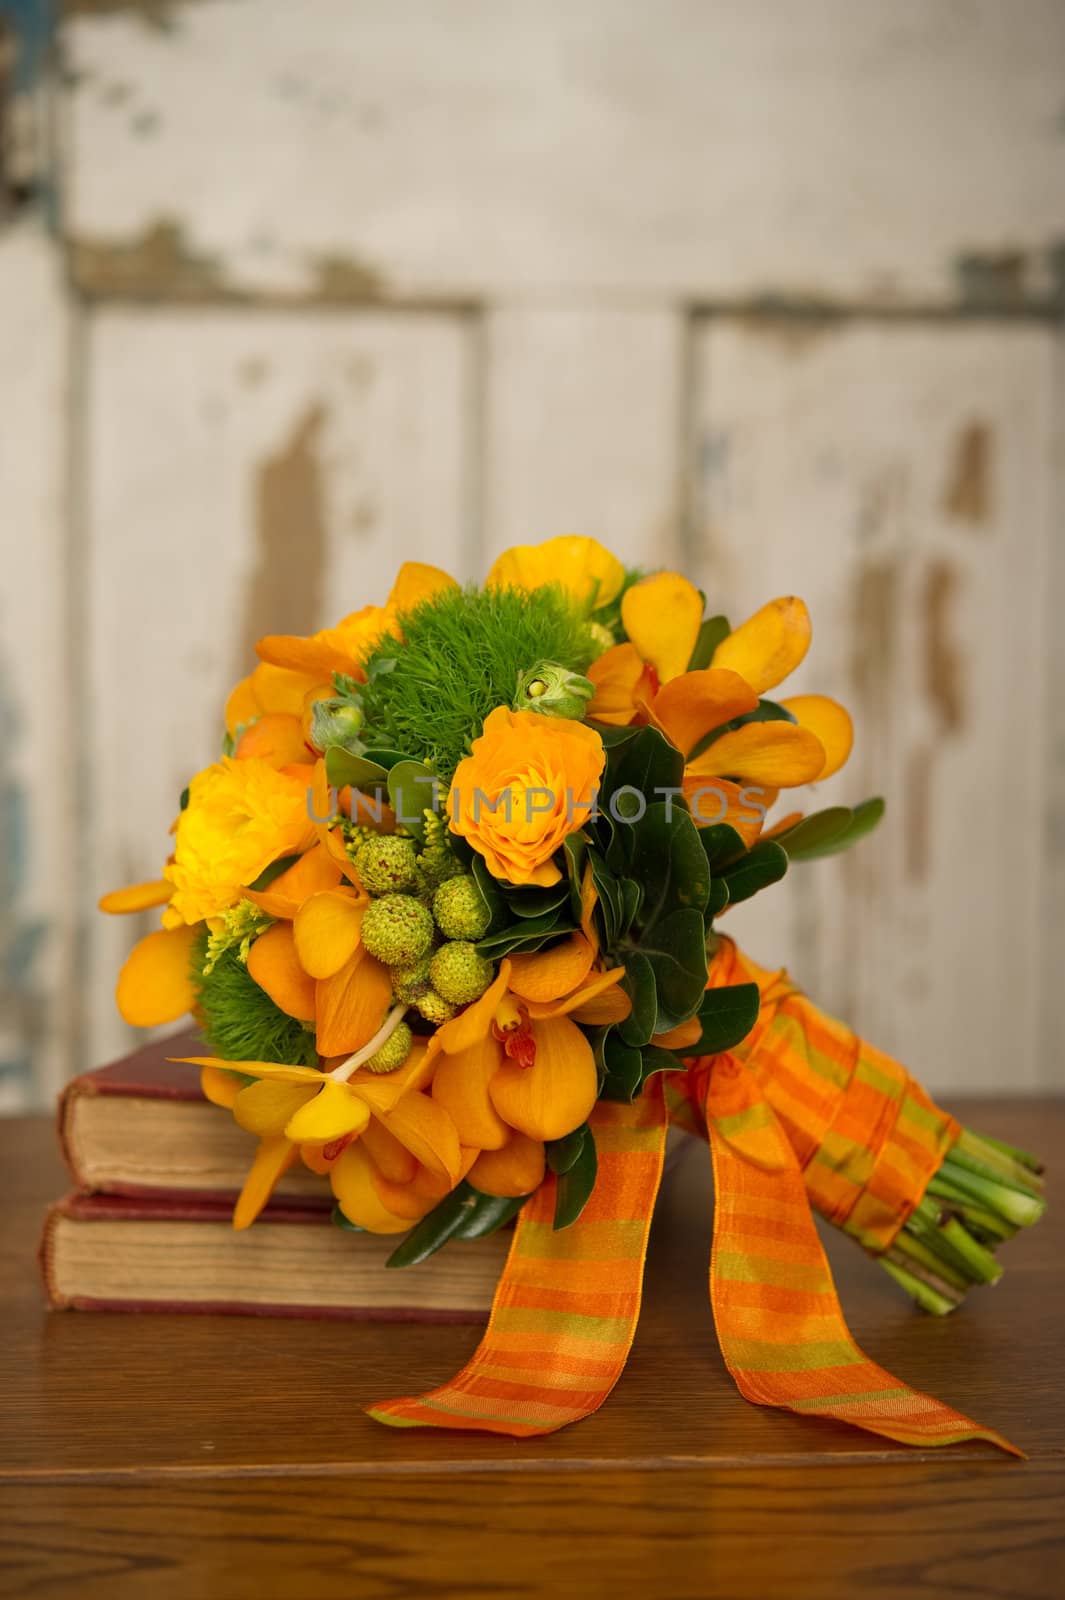 Image of a beautiful floral bouquet on stack of books